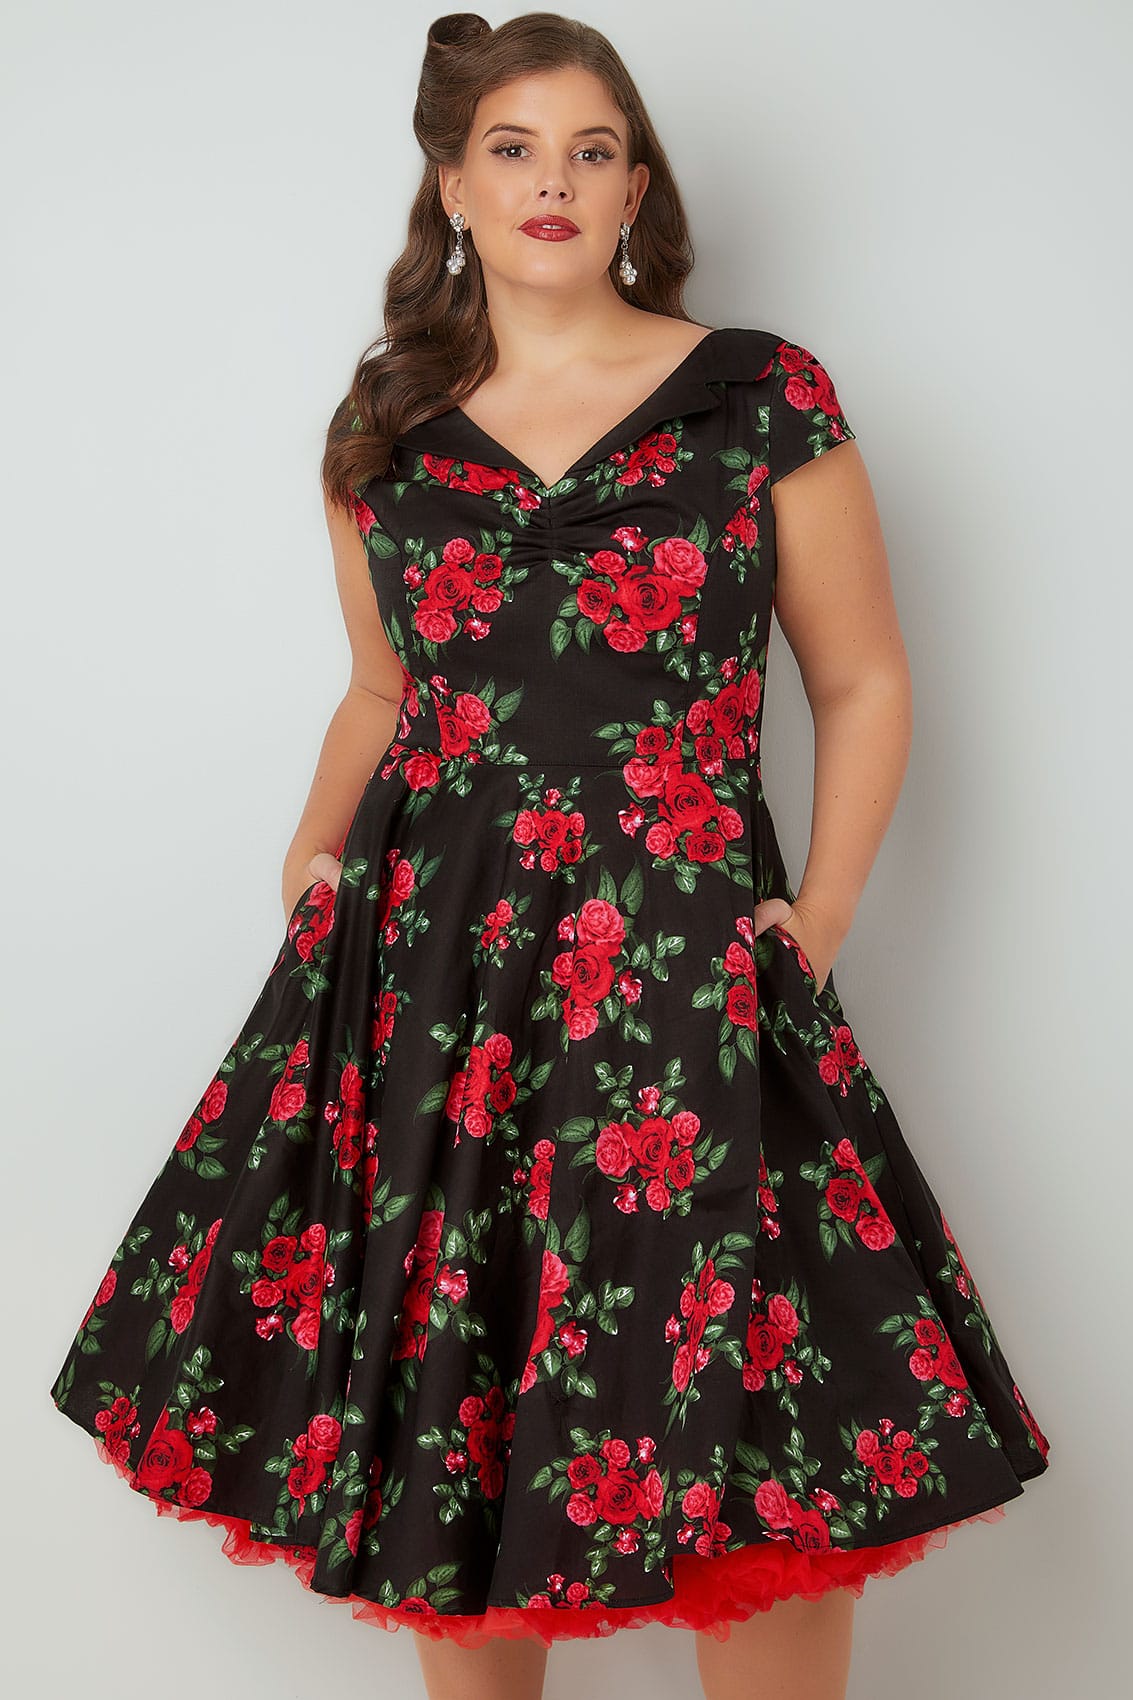 HELL BUNNY Black & Red Rose Print 50s Style Midi Dress plus size 16 to 32